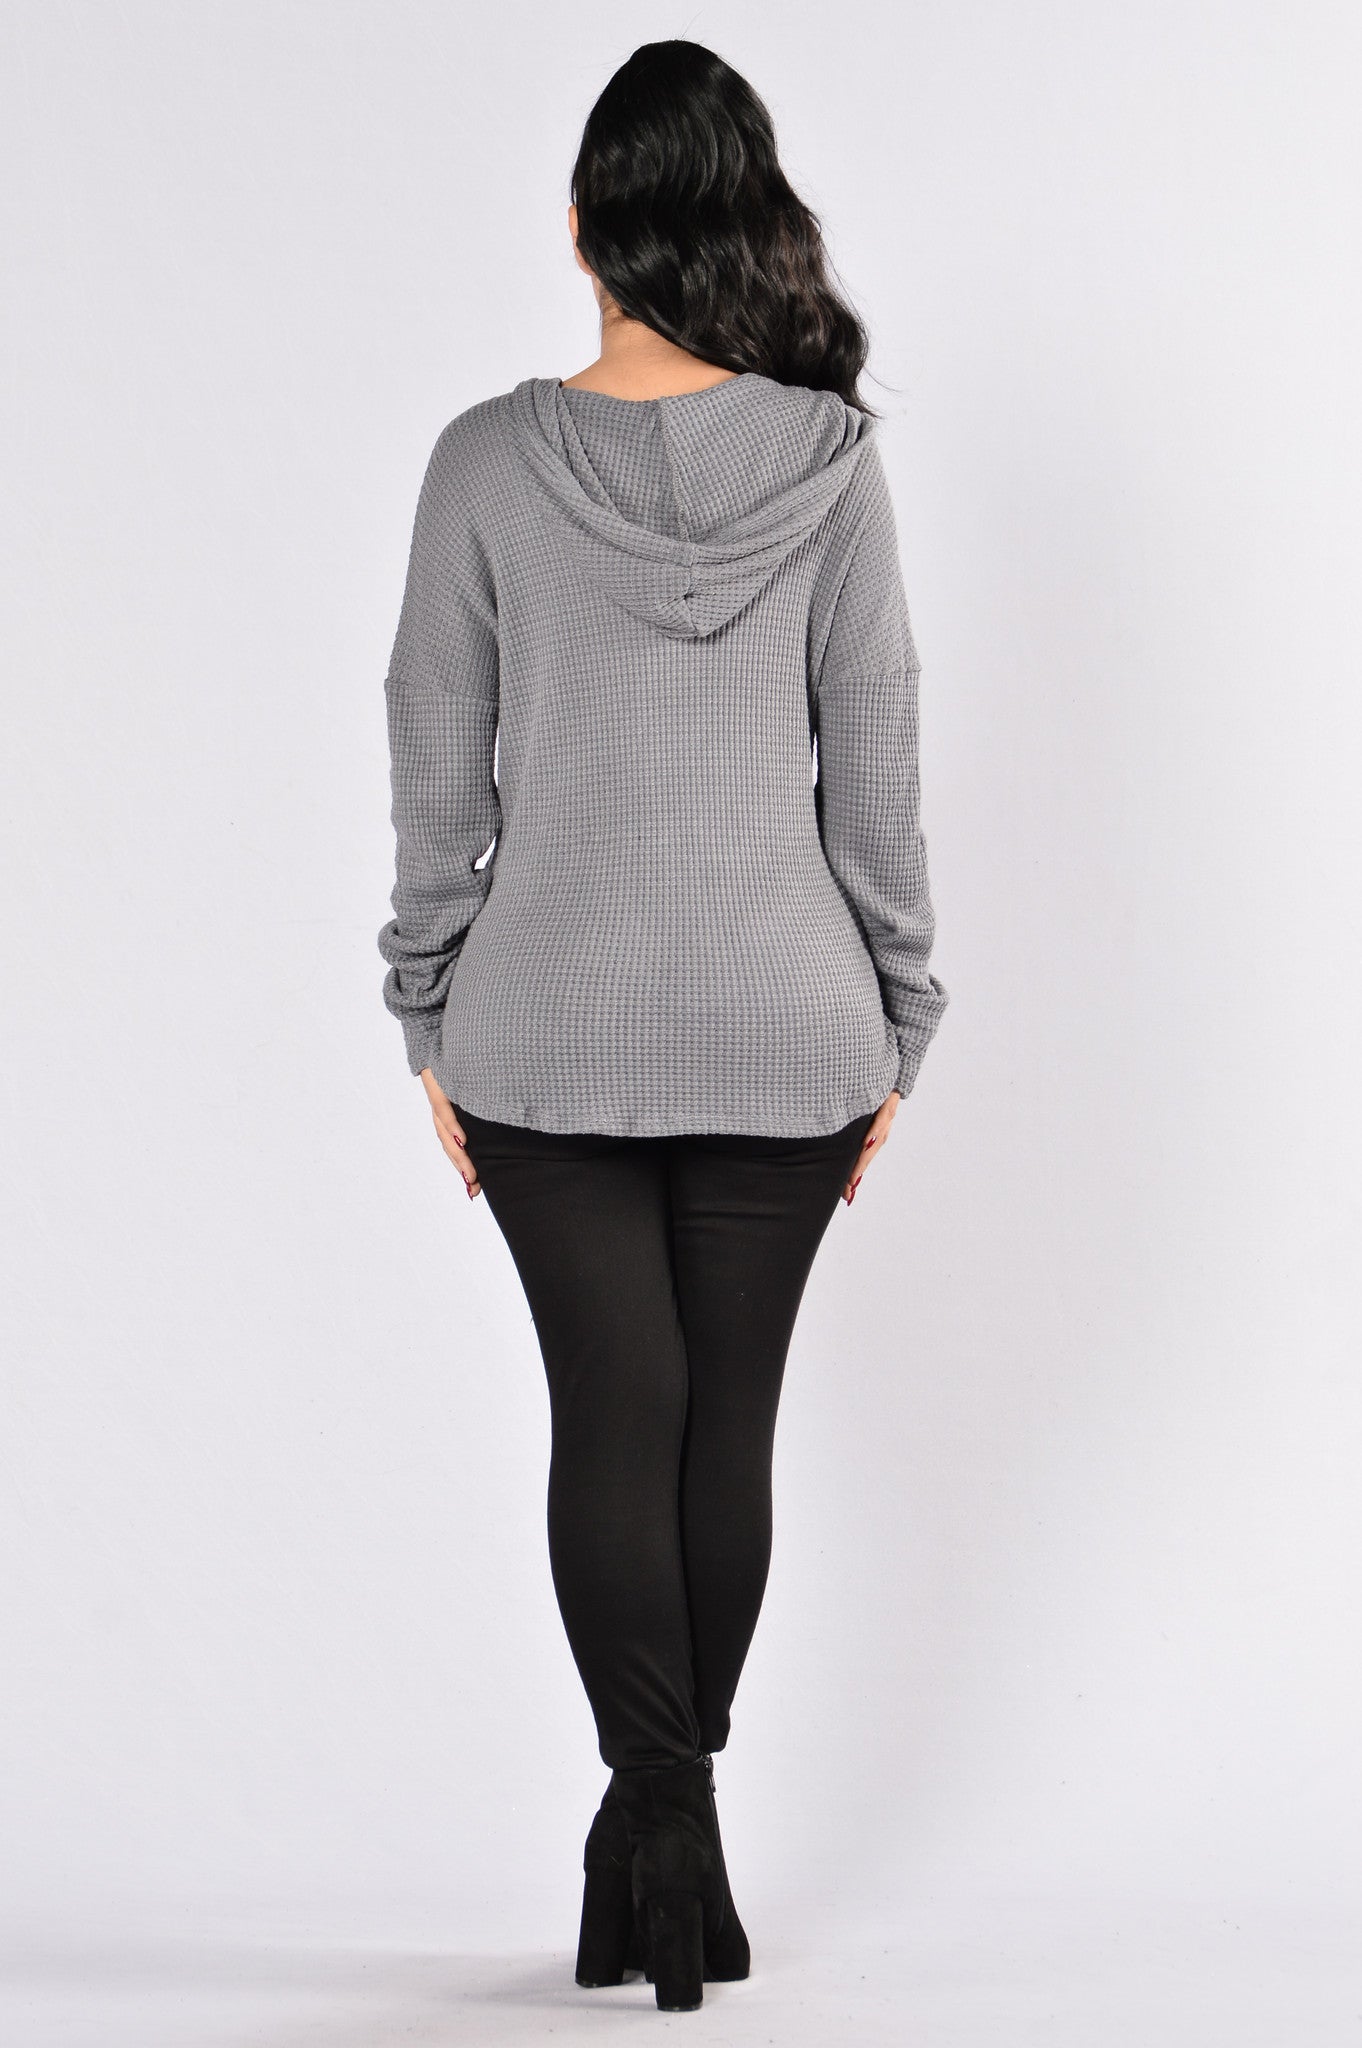 Lonely Hearts Club Sweater - Charcoal